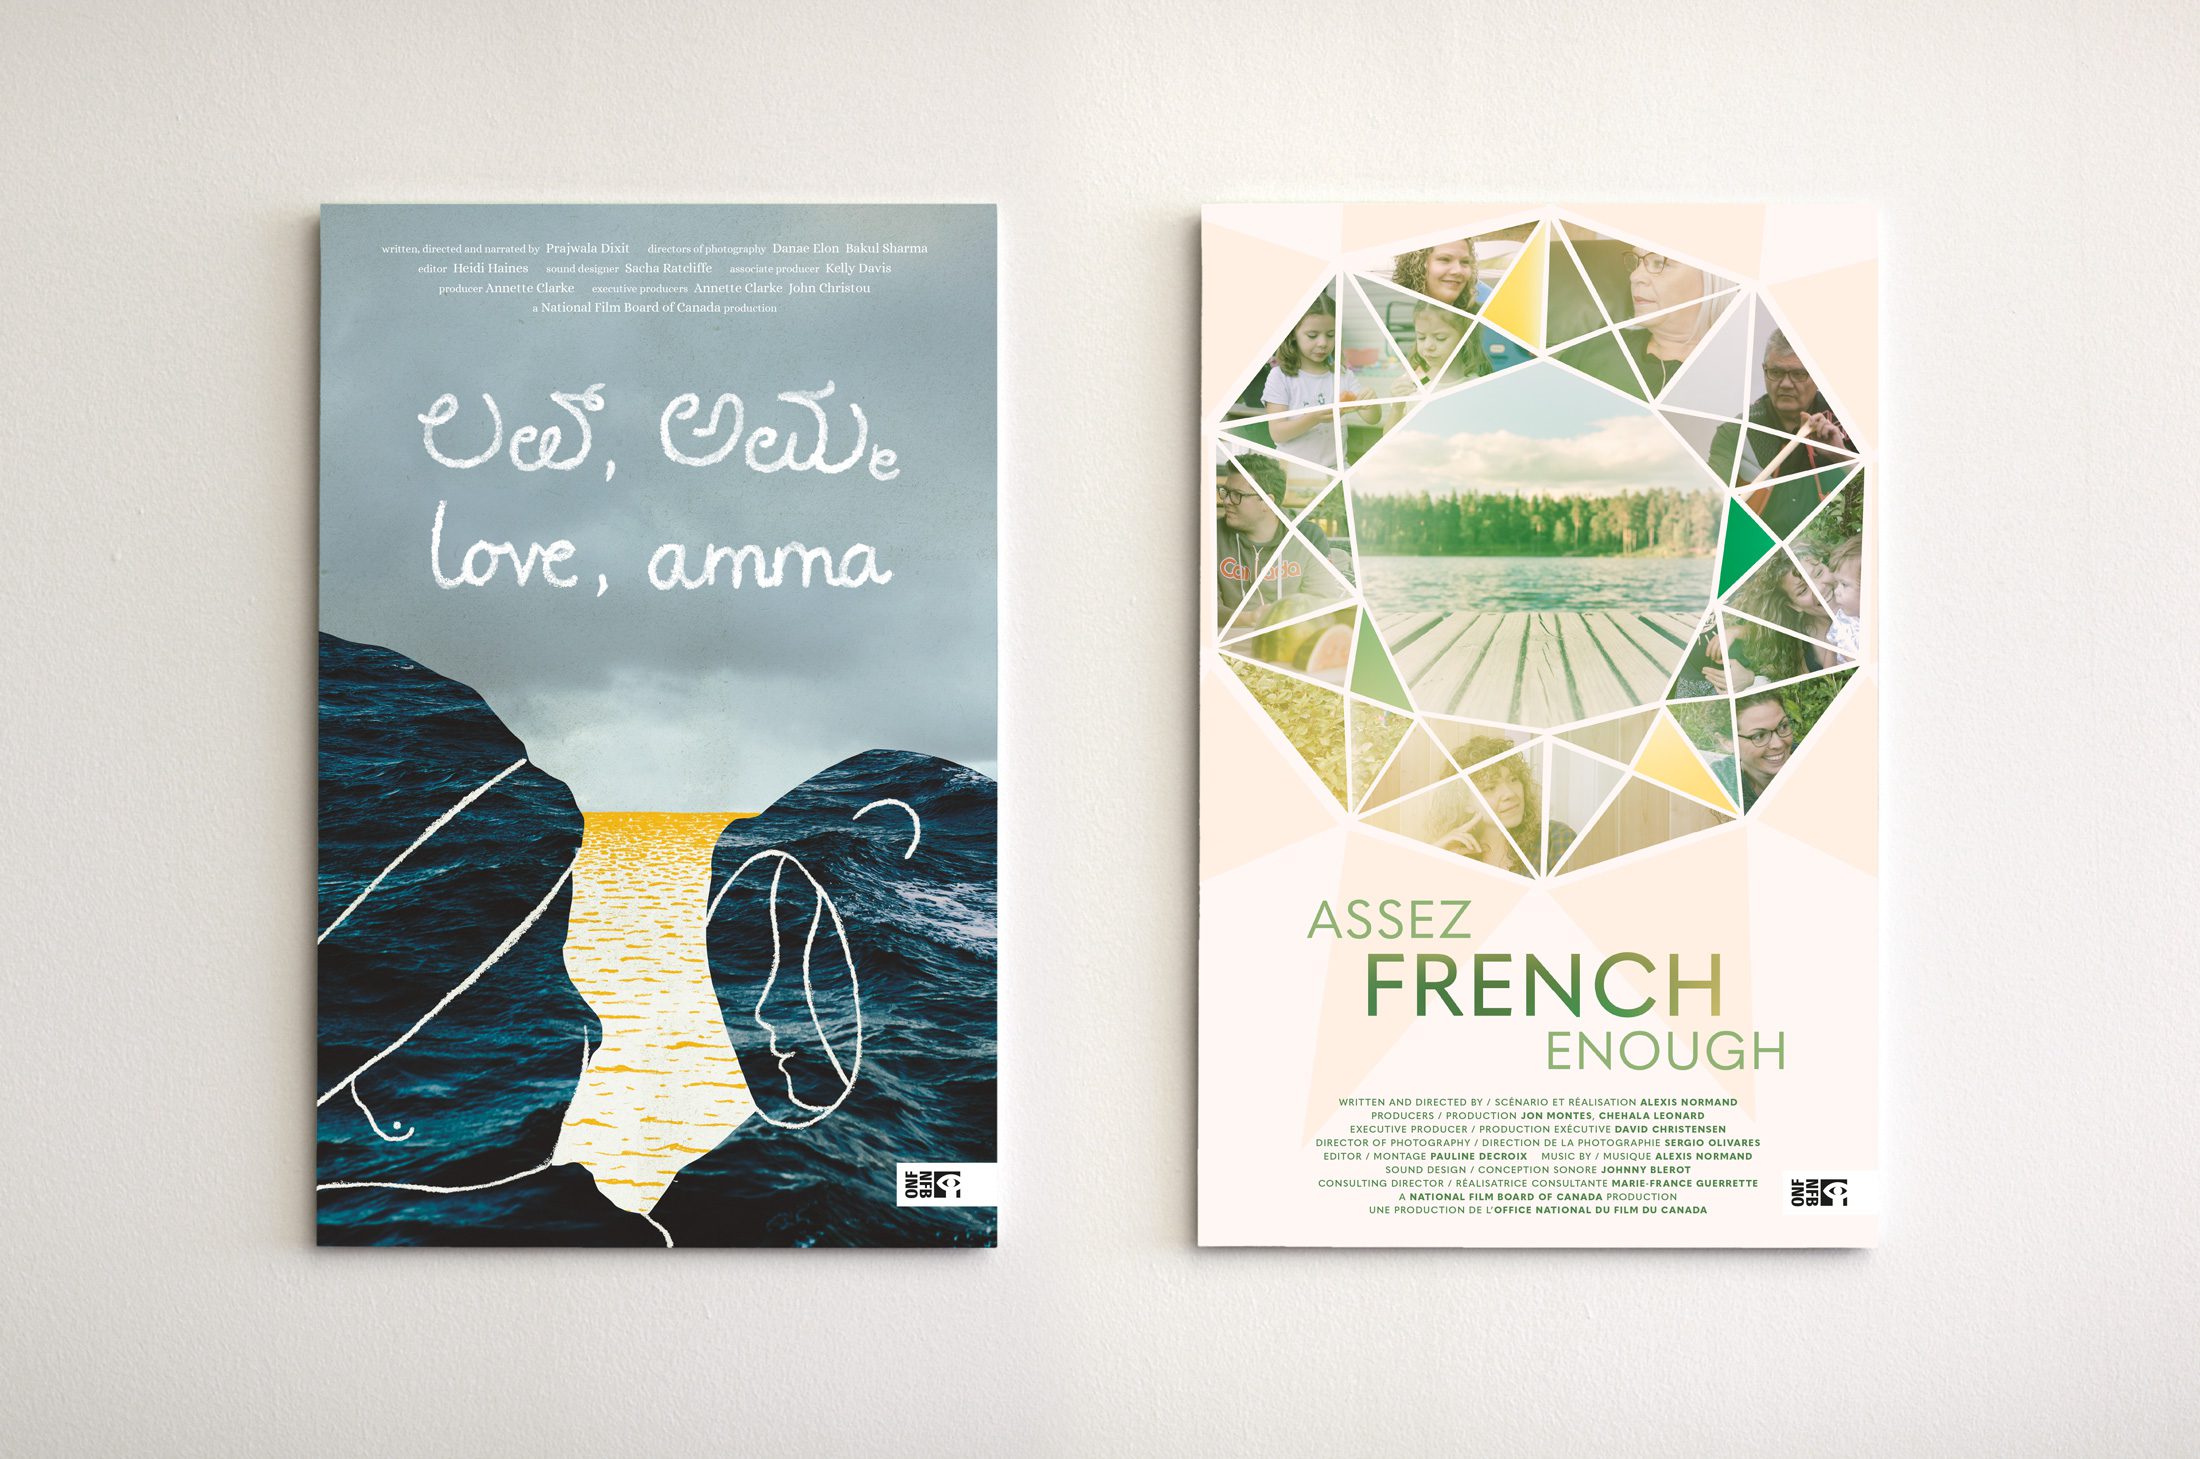 Posters for films Love, Amma and Assez French Enough on a white wall